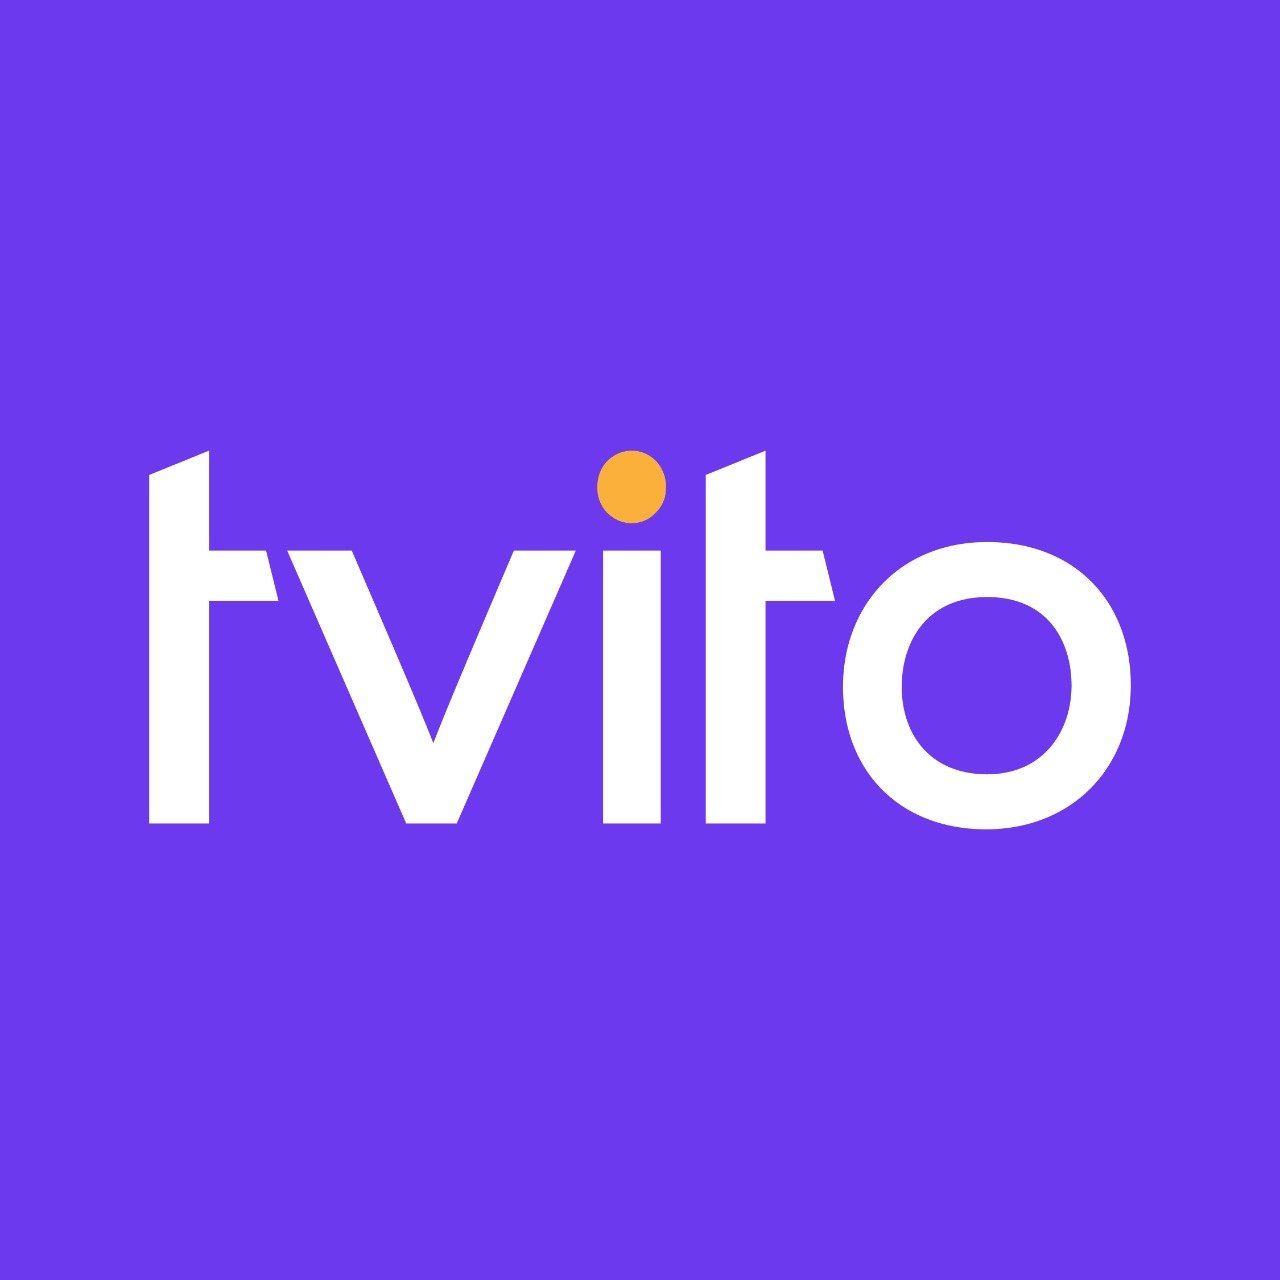 Petpooja launches Tvito, a restaurant marketing tool to empower restaurants in engaging with their audience through digital marketing